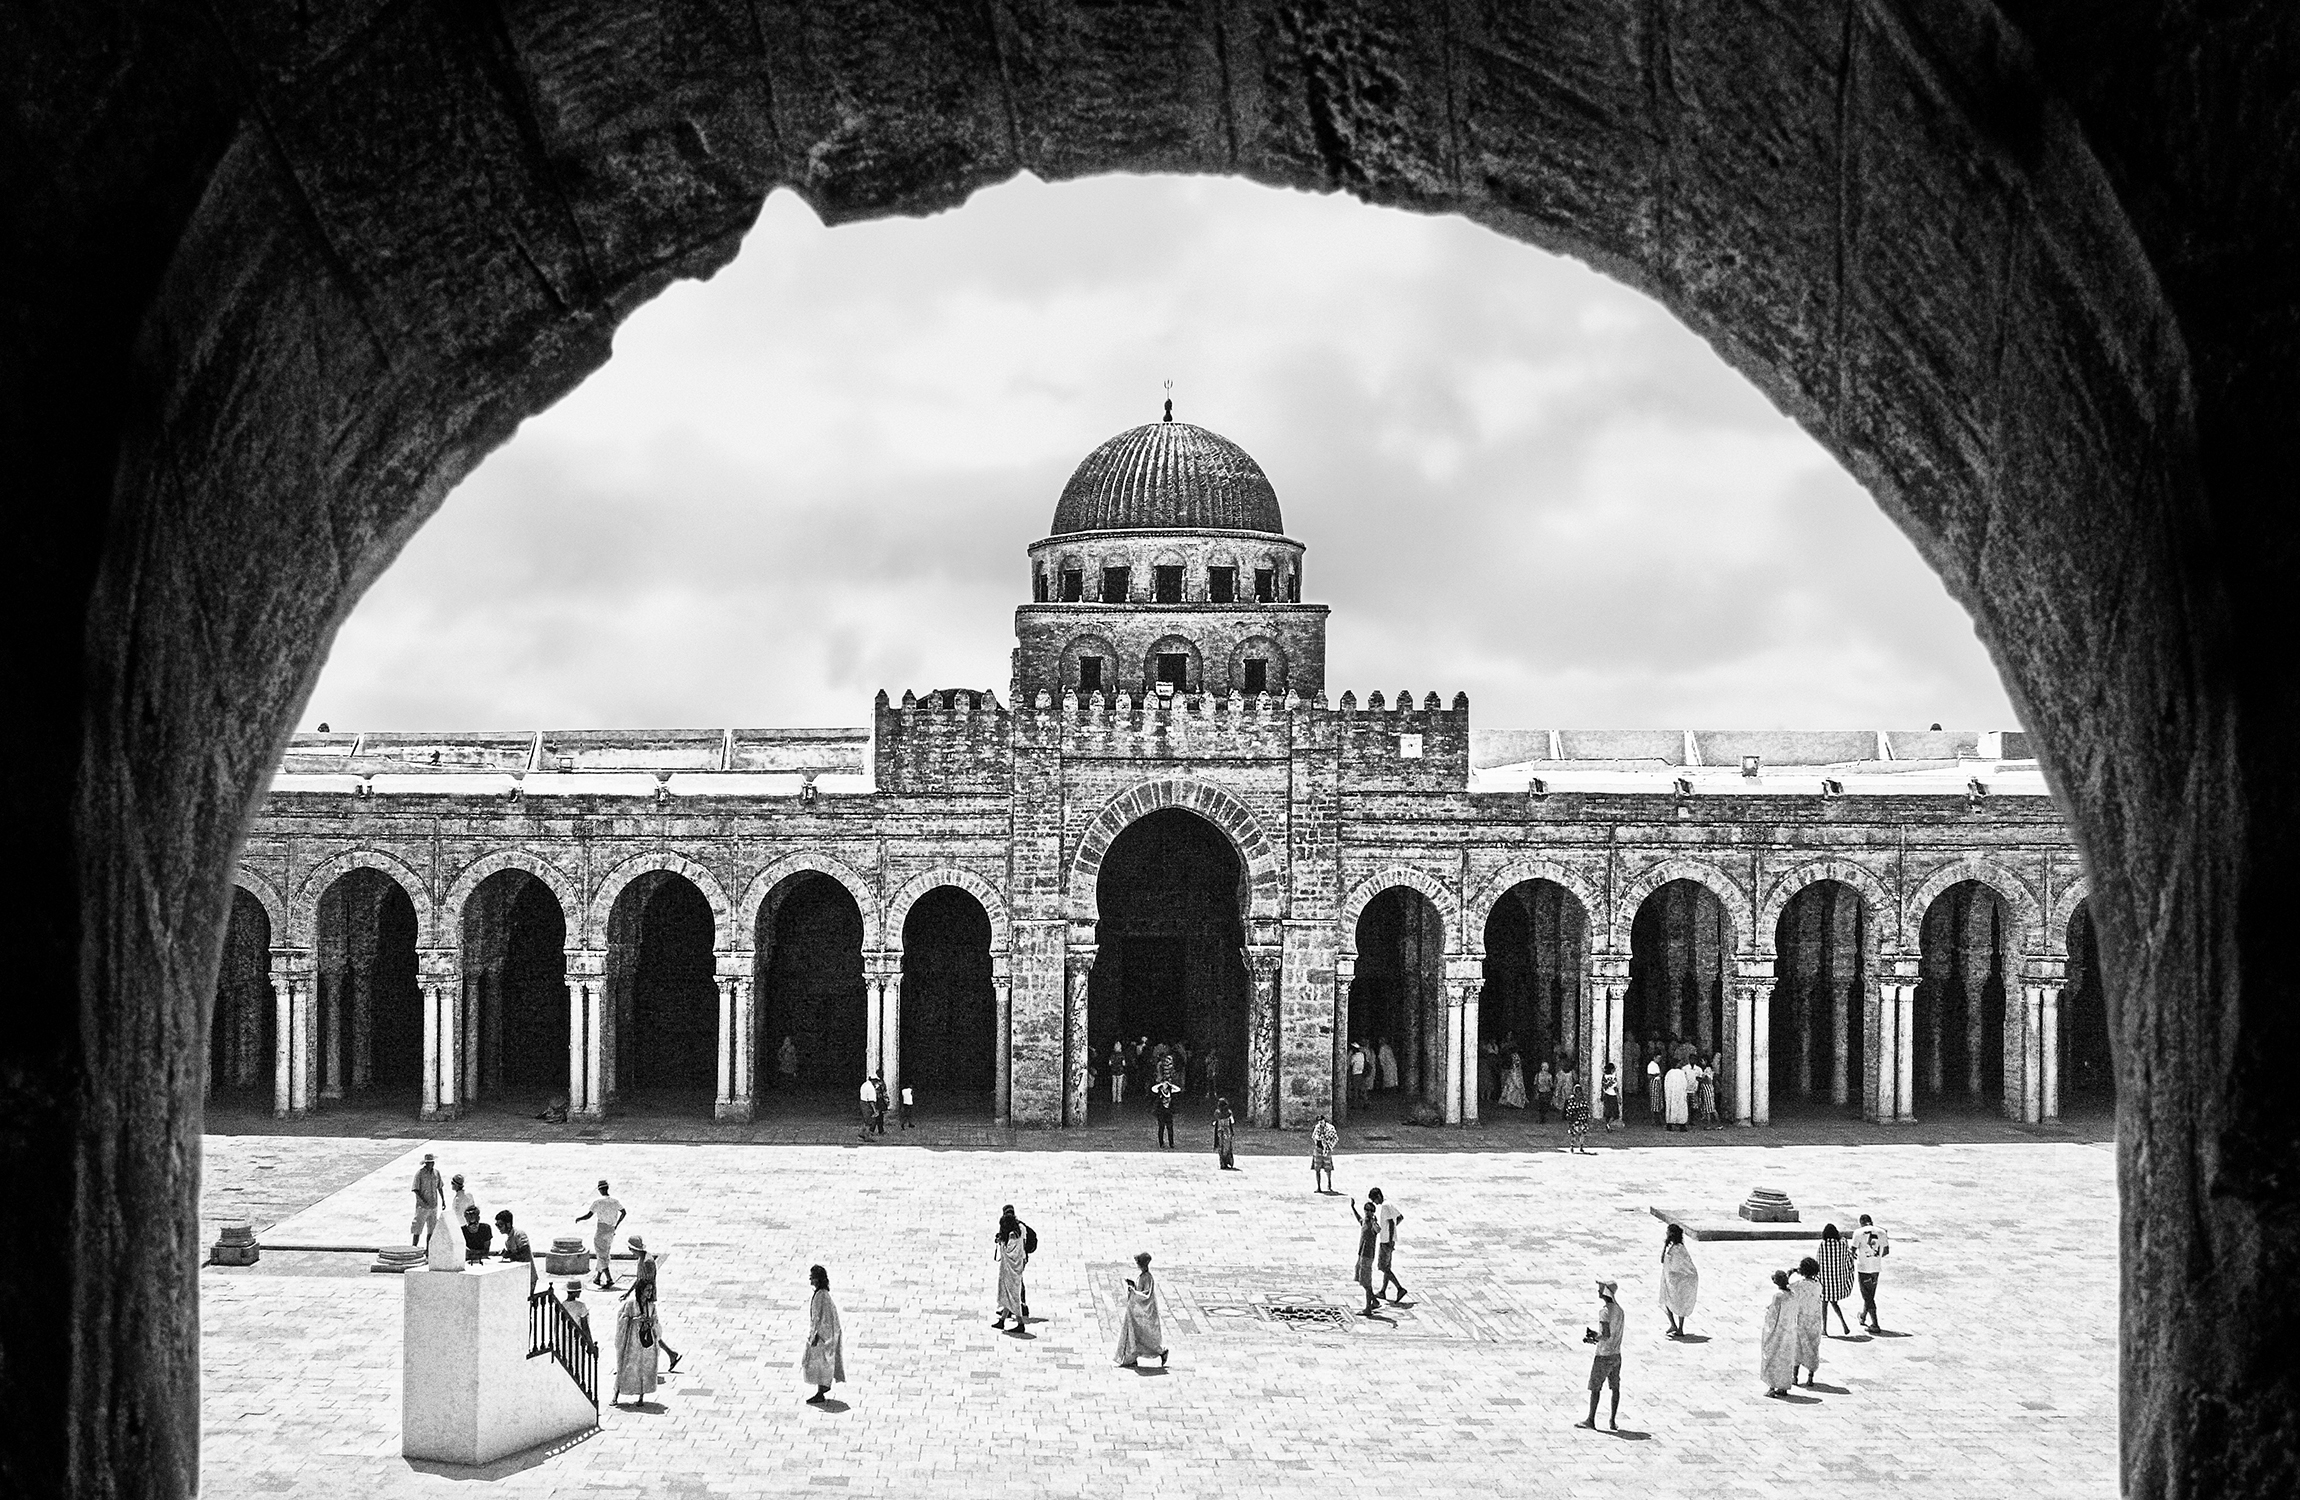 Great Mosque of Kairouan, a view to remember